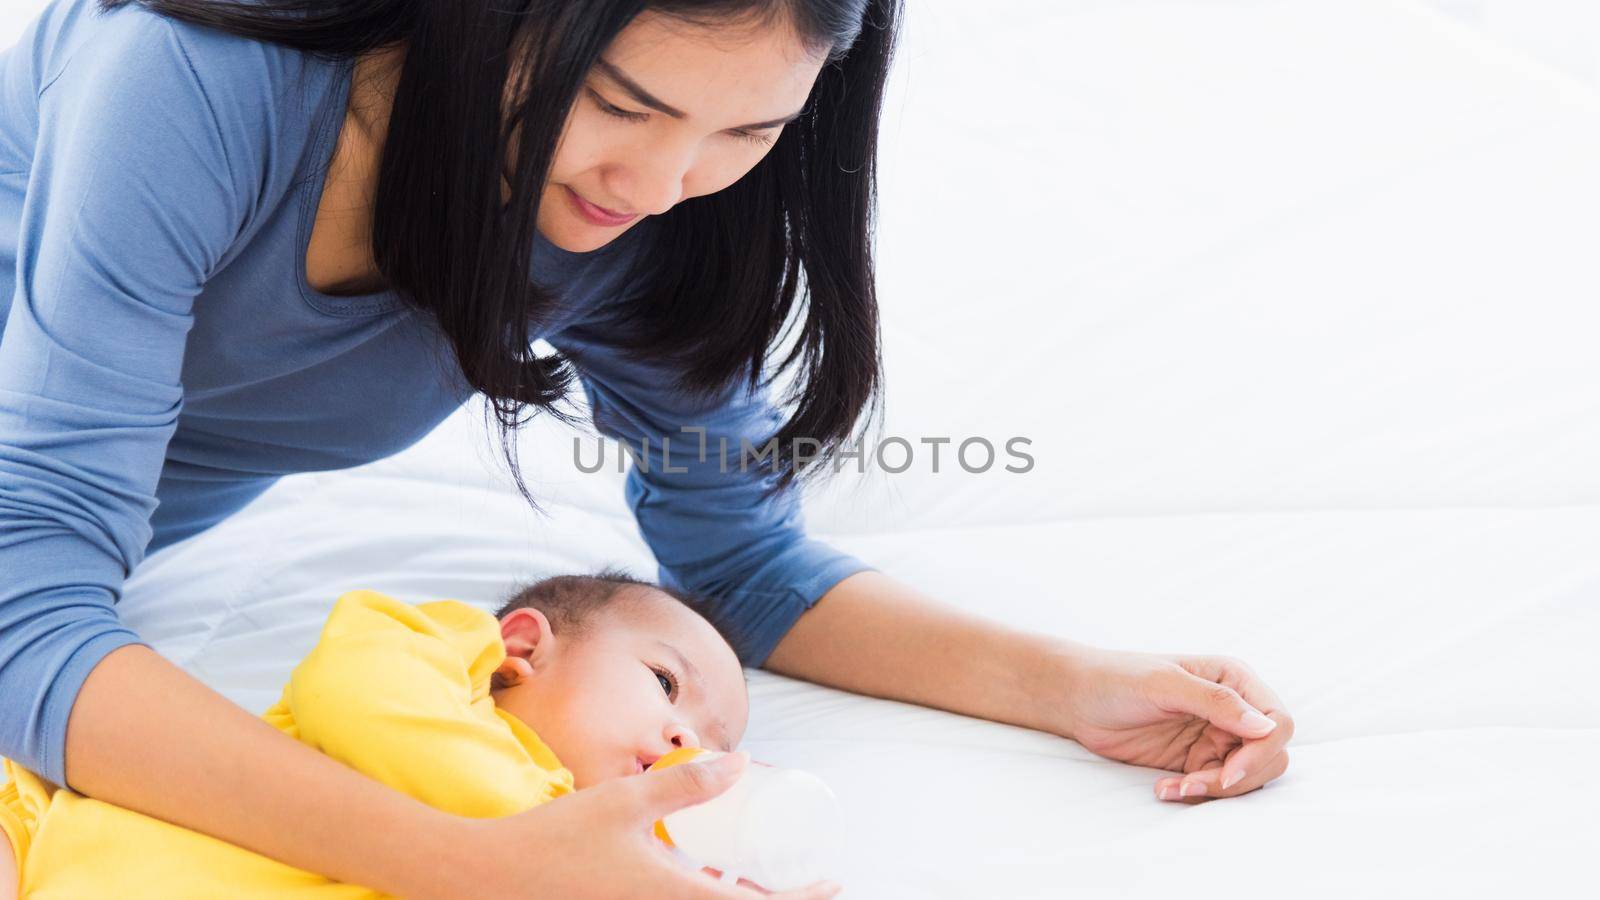 mother holding and feeding infant newborn baby from milk bottle by Sorapop